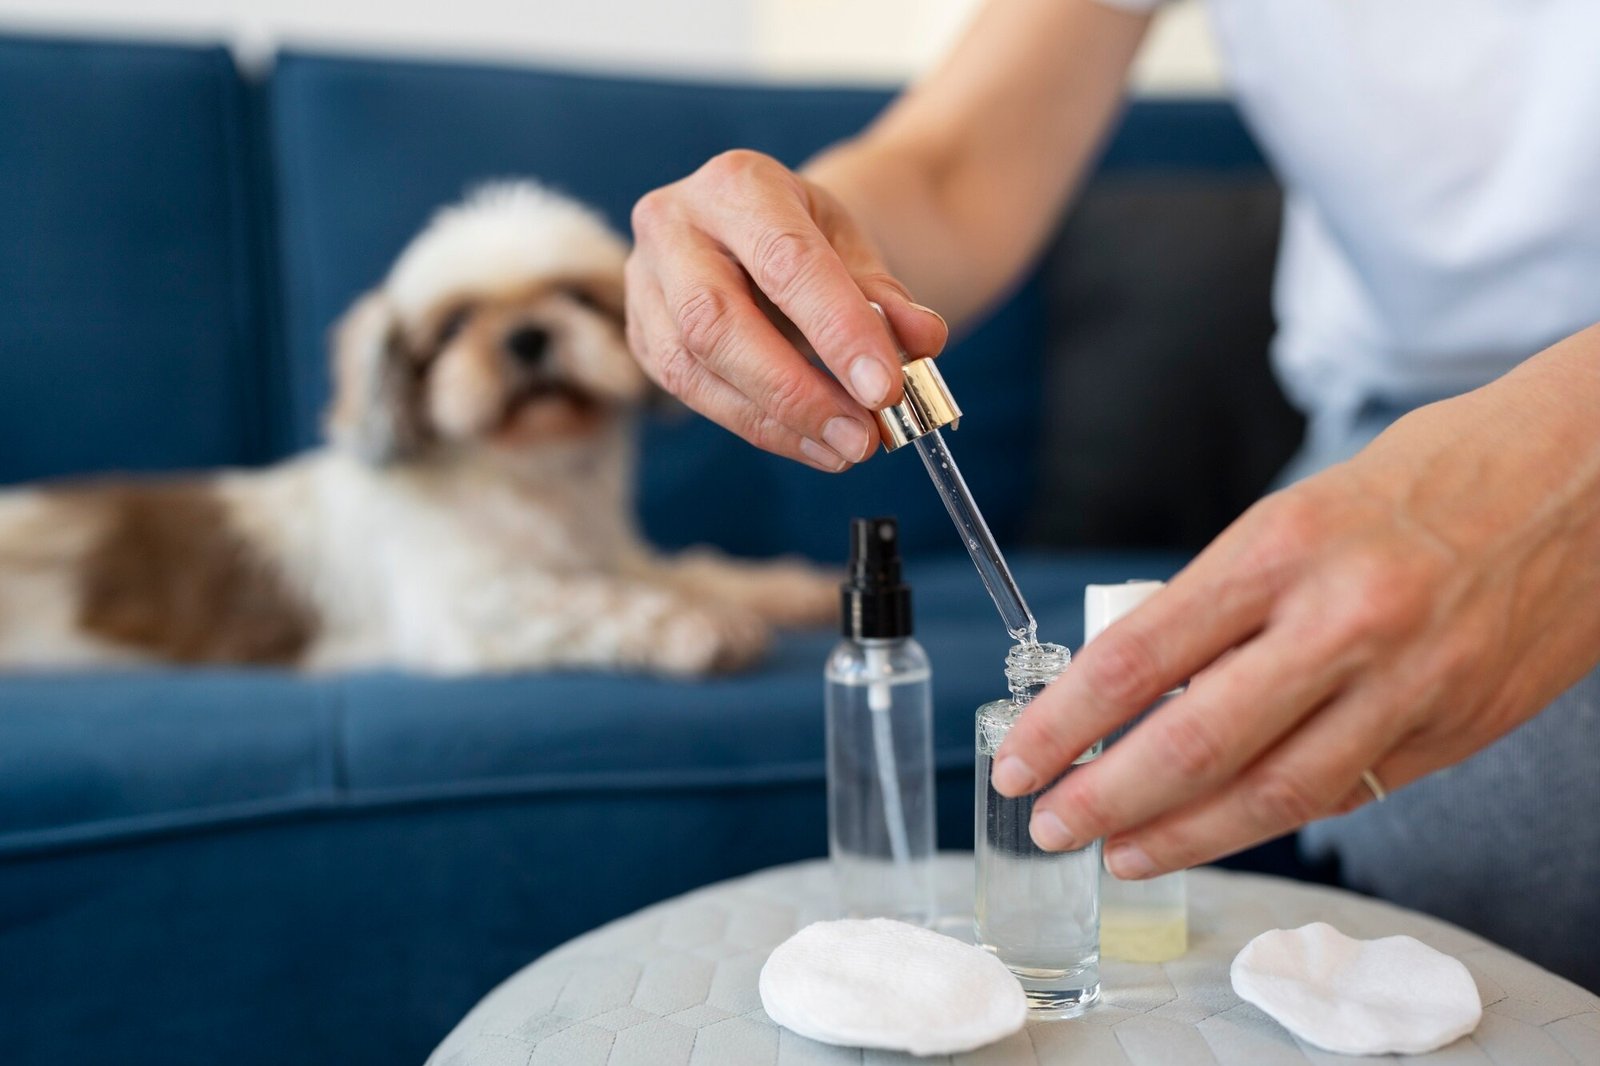 Is Hemp Oil For Dogs The Same As CBD?